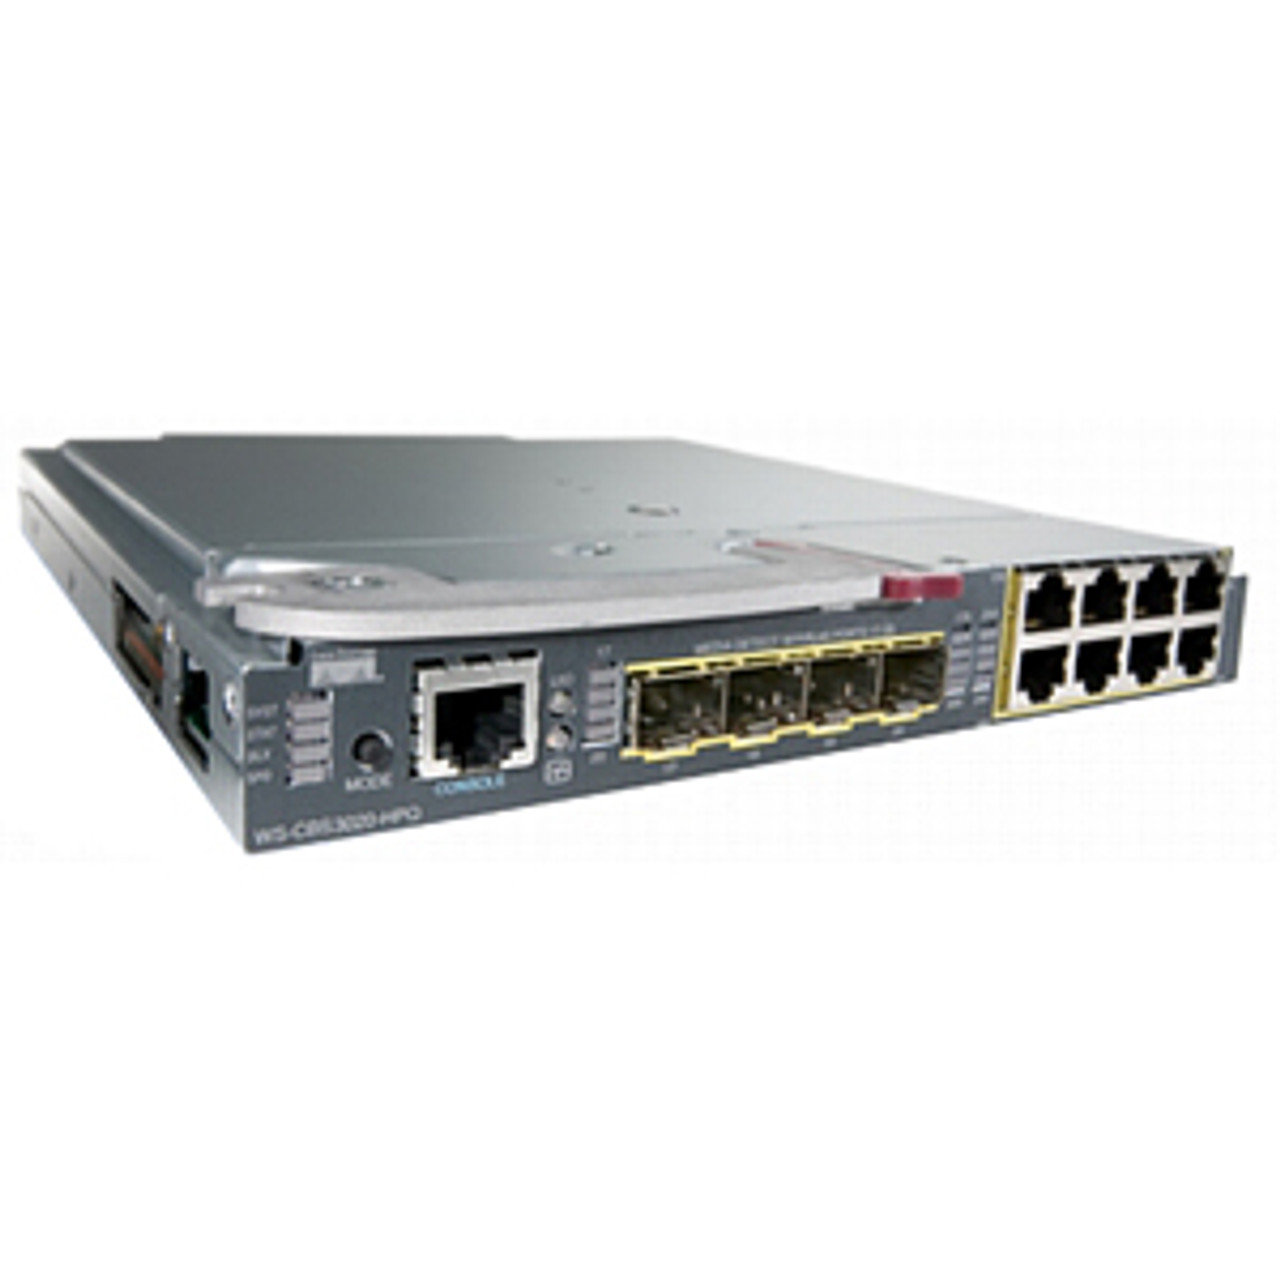 WS-CBS3020-HPQ Cisco Catalyst 8-Ports 10/100/1000Base-T RJ-45 Manageable Layer2 Blade Switch 3020 with 4x Shared SFP Slots (Refurbished)